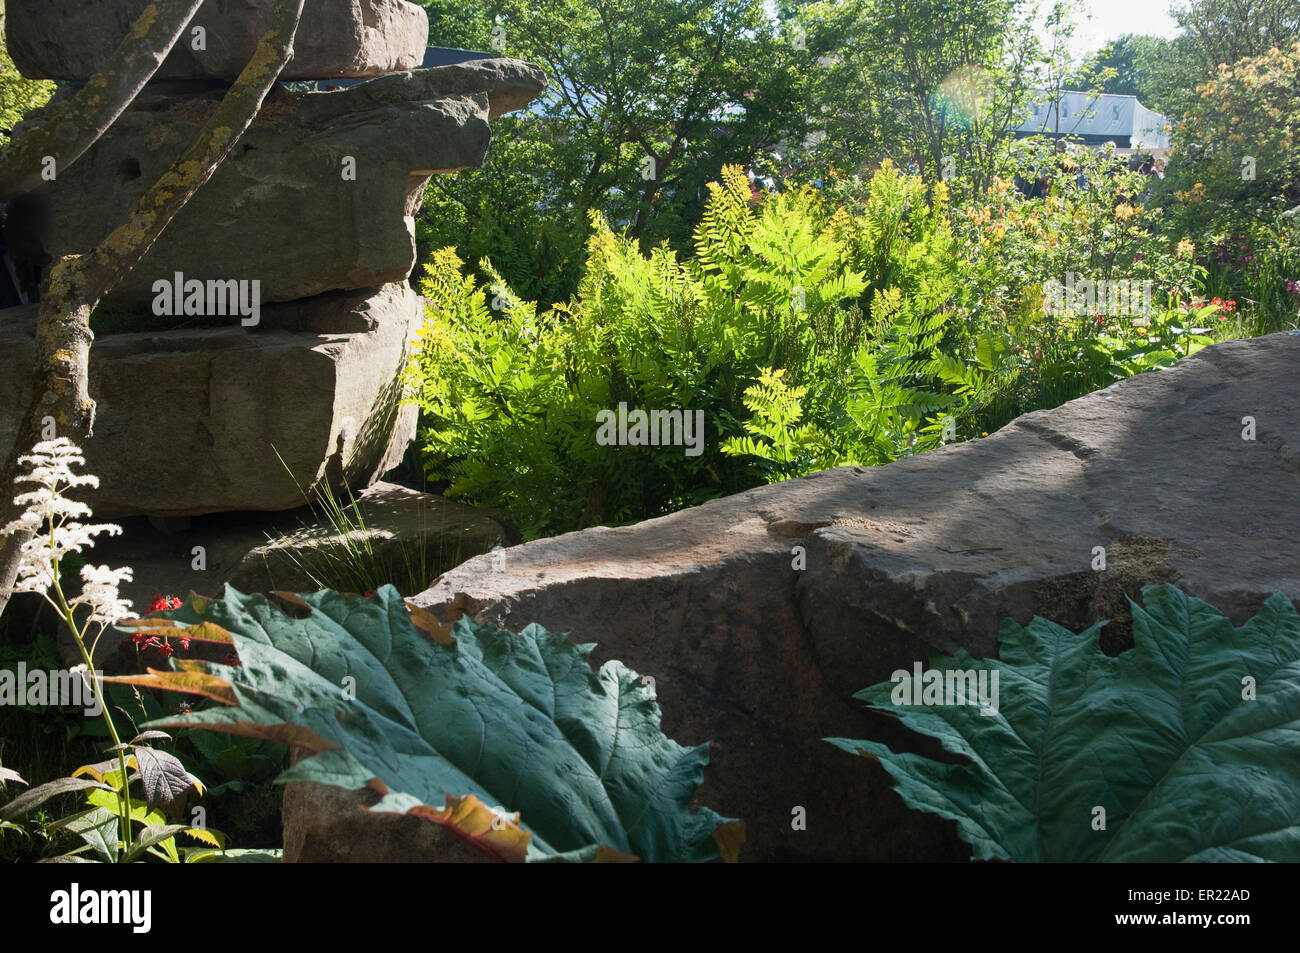 RHS Chelsea Flower Show 2015 - Dan Pearson's Rock Garden with Trout Stream.  Sunlit Rocks and Ferns. Stock Photo